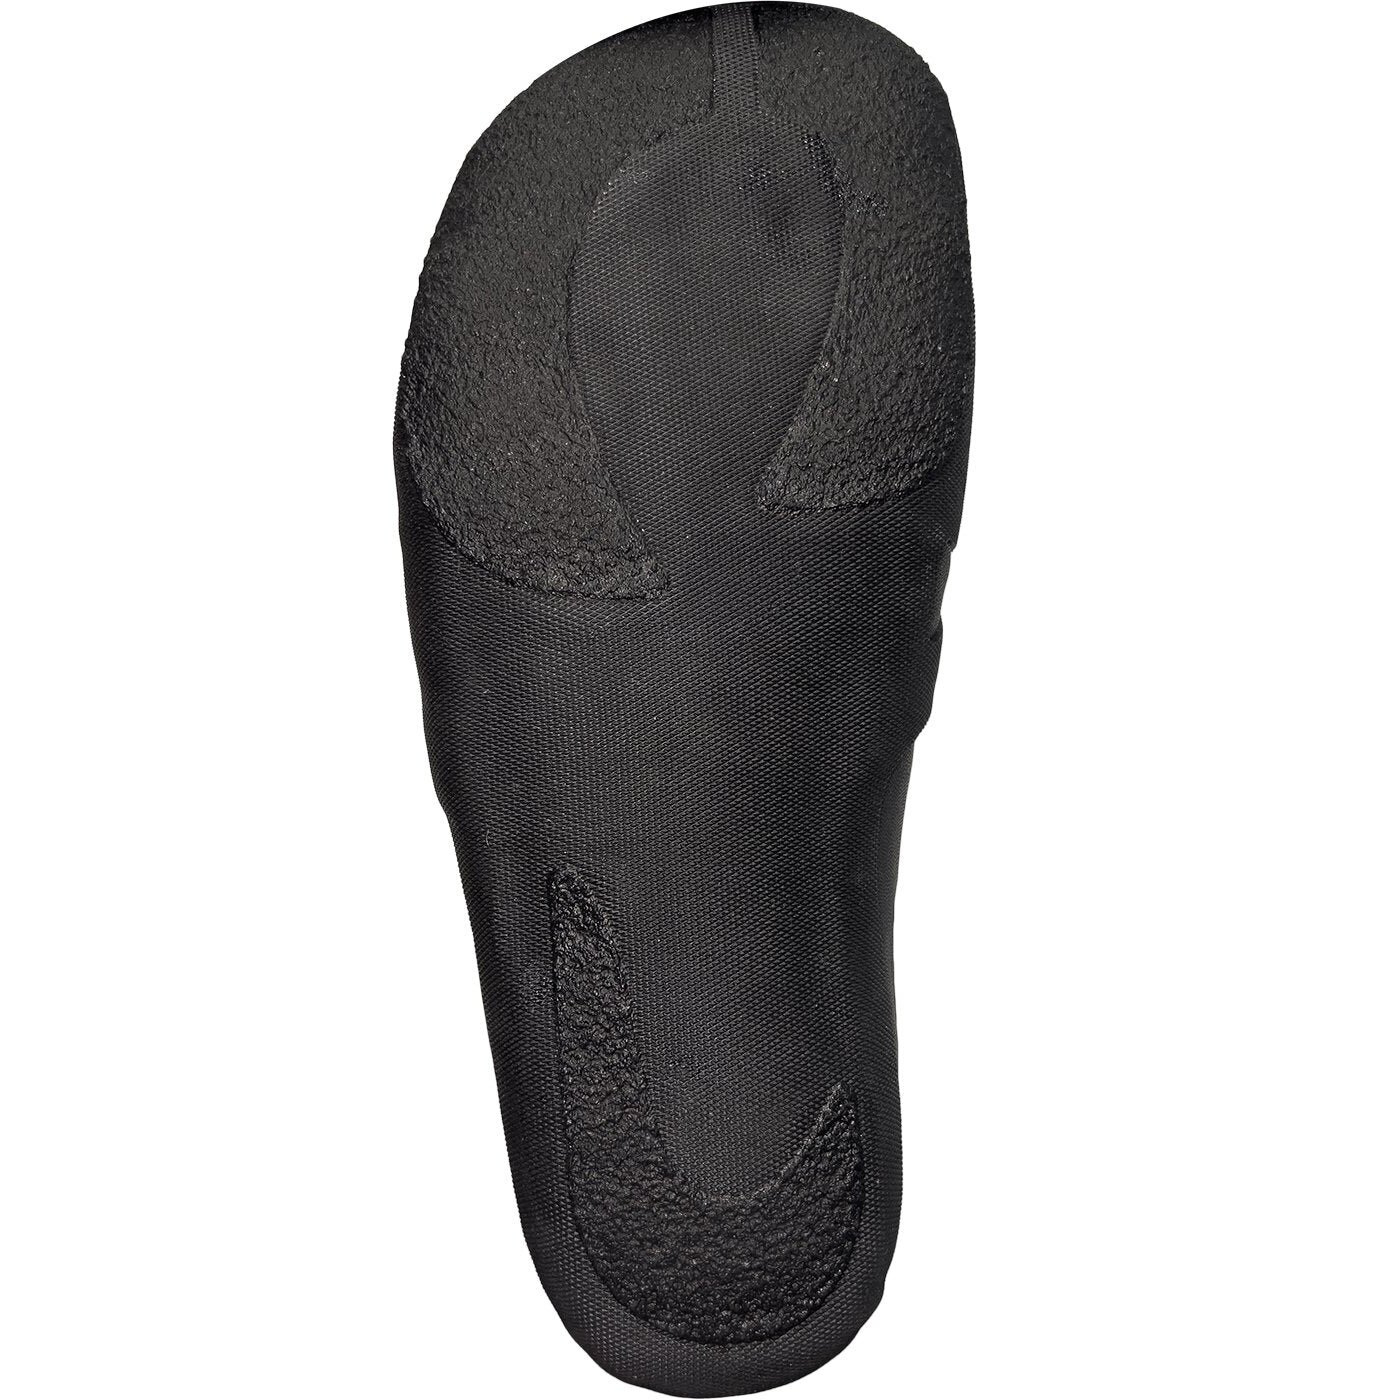 Vissla North Seas Dipped 7Mm Round Toe Wetsuit Boot